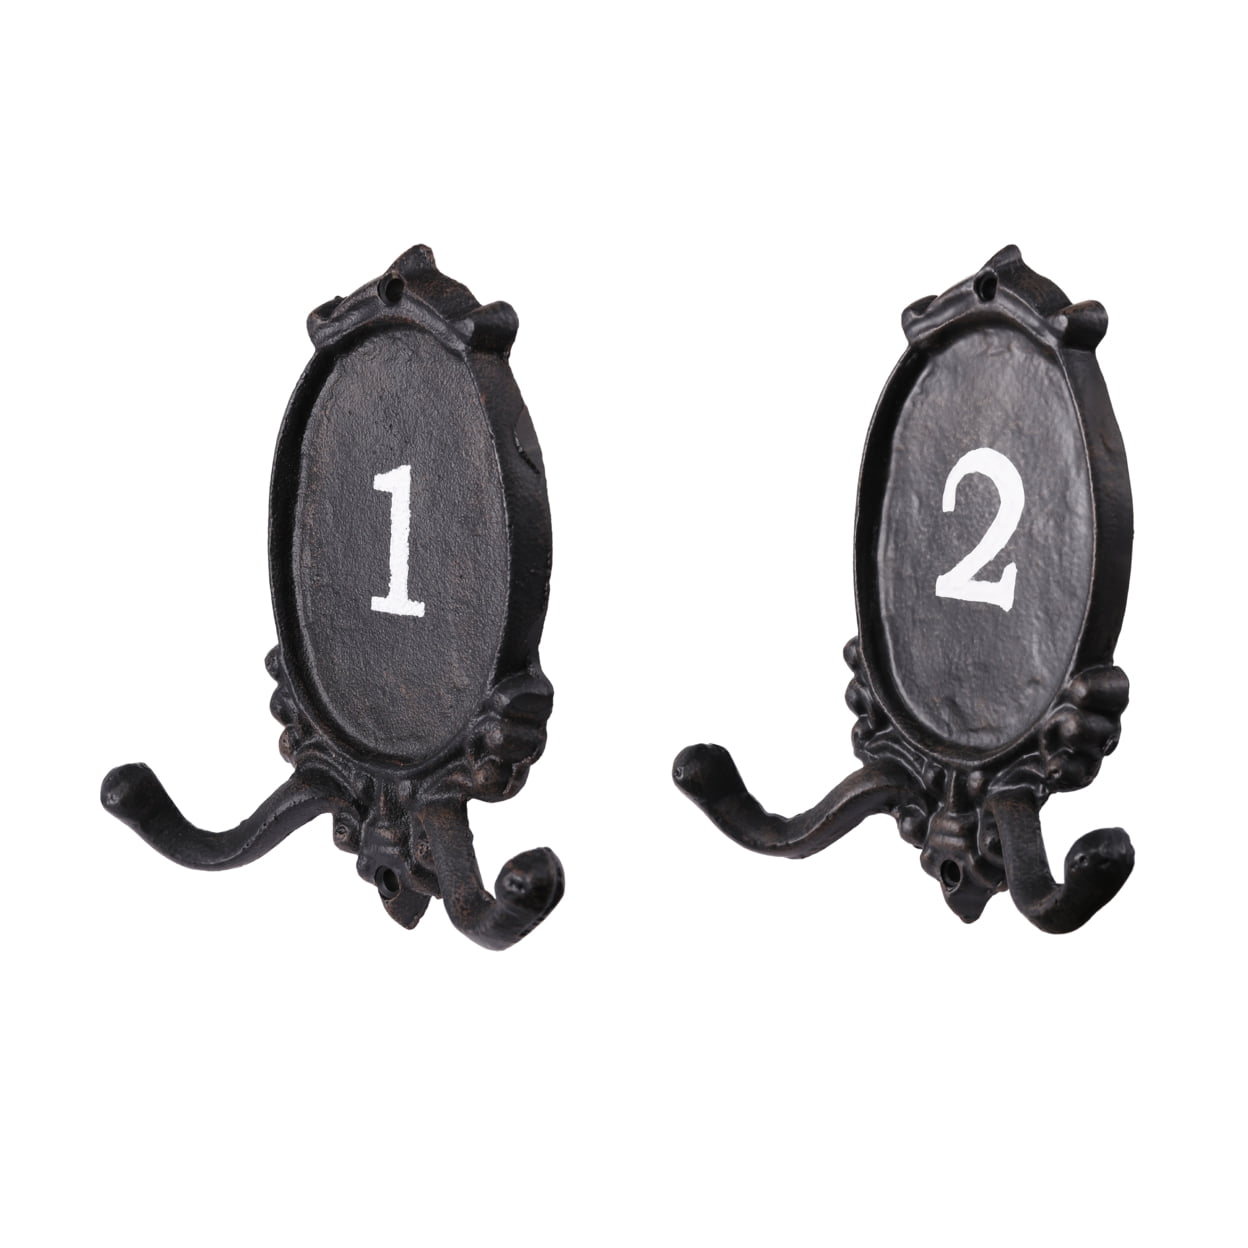 Picture of Benzara BM202276 Iron Prong Coat Hook with Dual Hanging Angles, Black - Set of 2